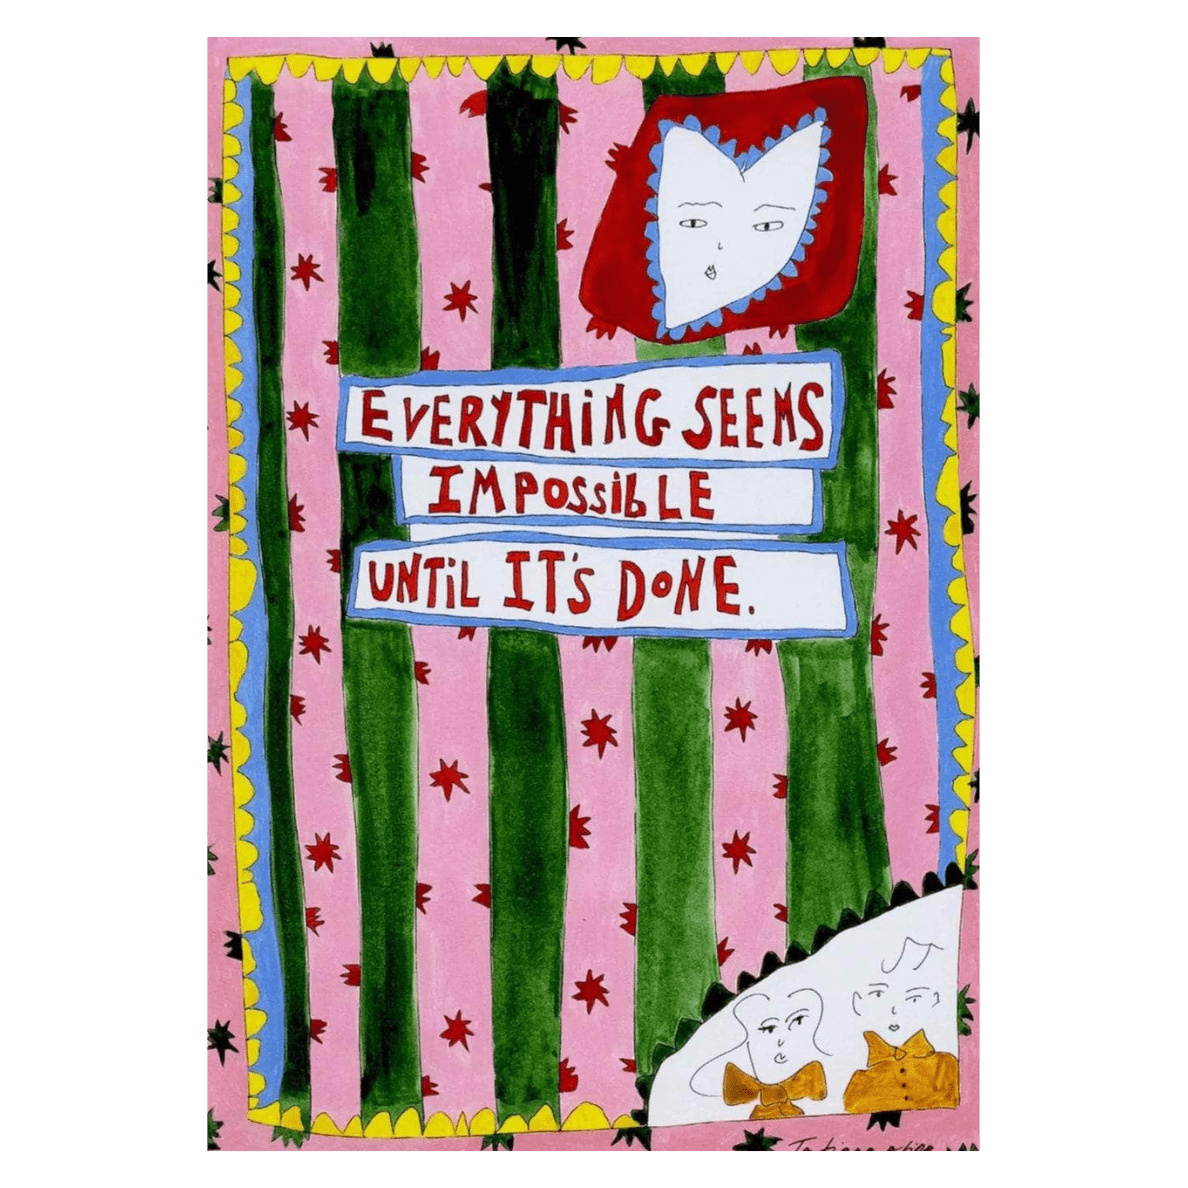 "Everything seems impossible until it's done" Art Print